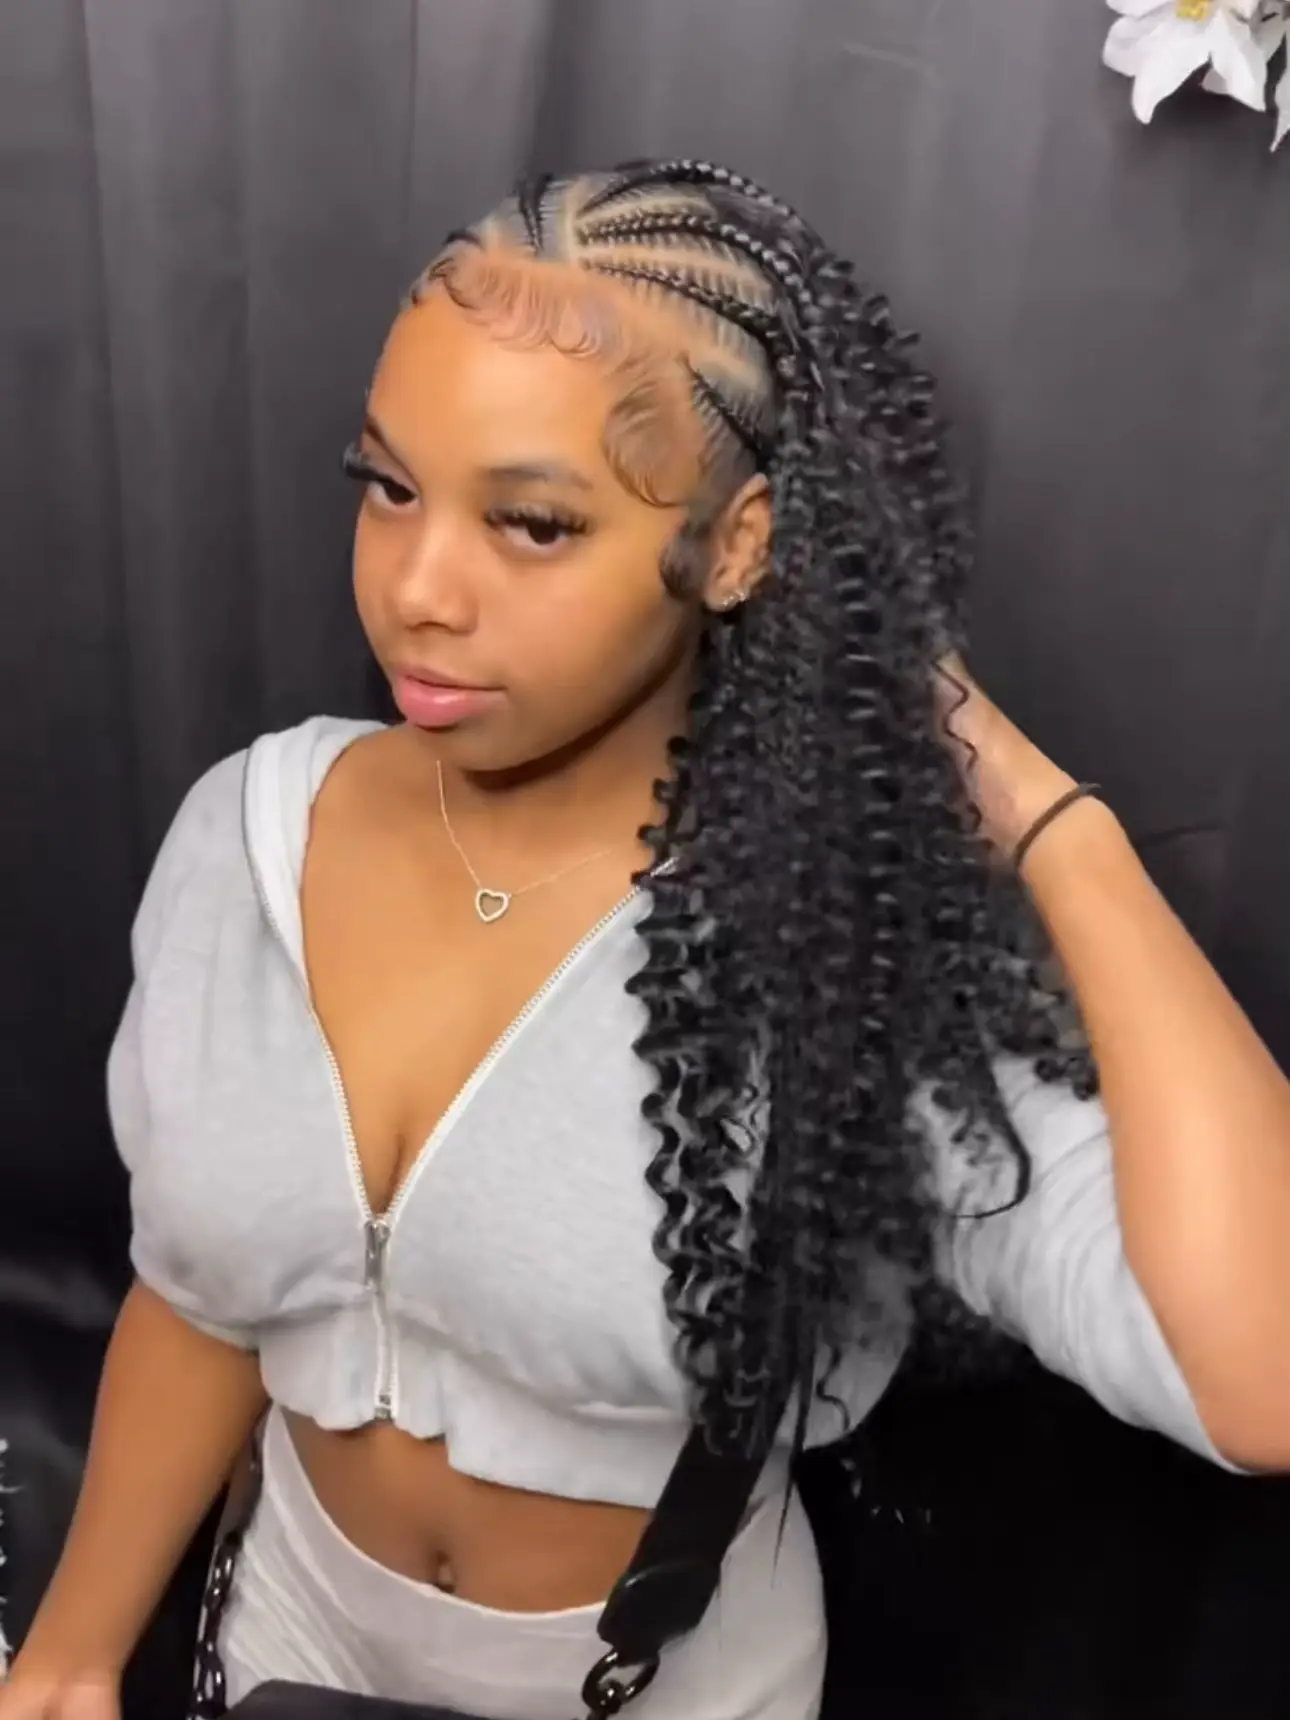 Braids in the front quick weave in the back #braids #quickweave #braid